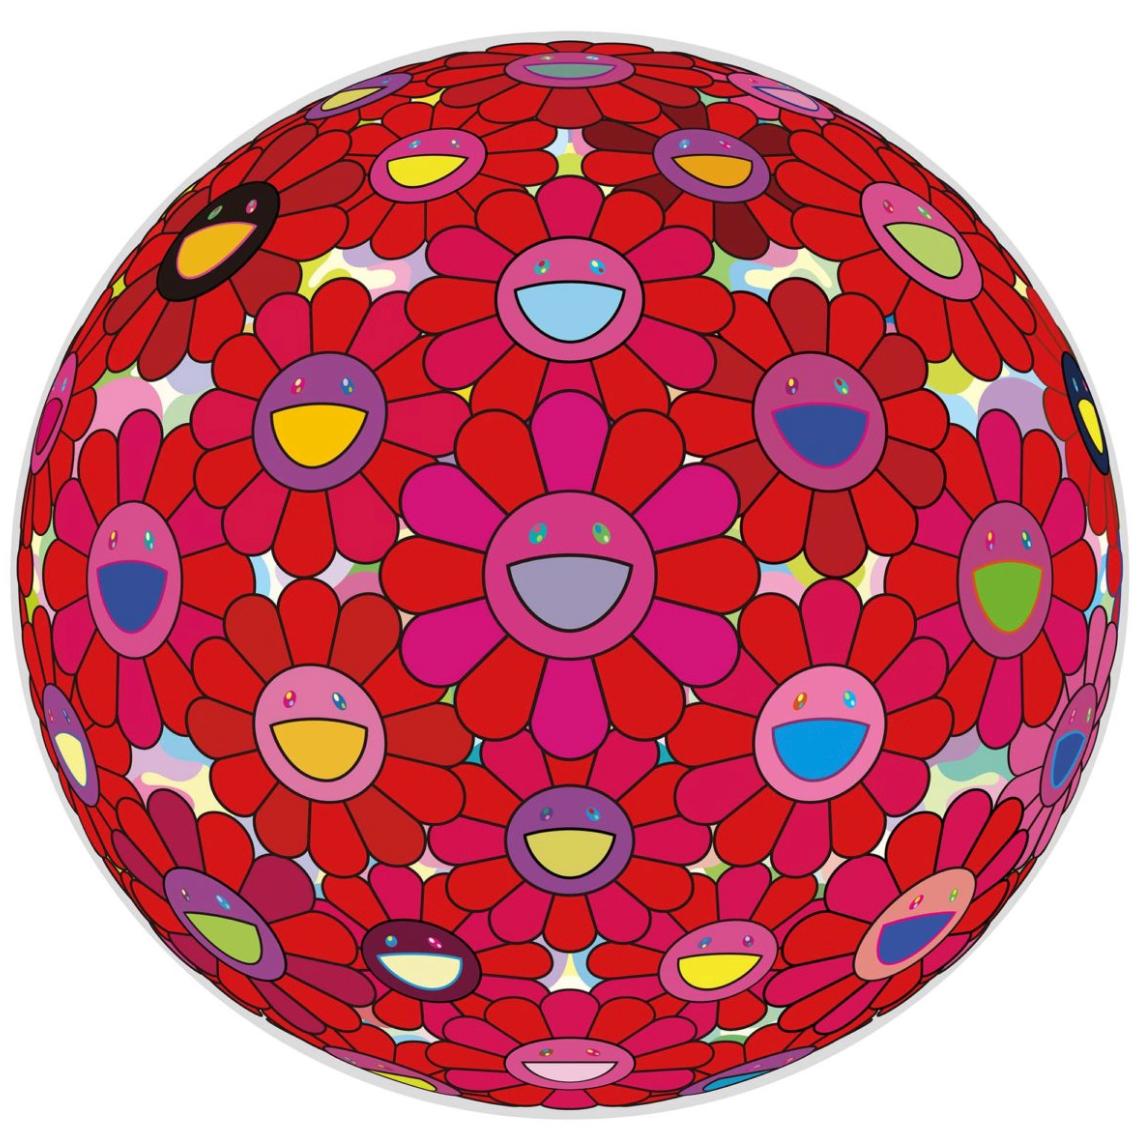 Let us Devote Our Hearts - Print by Takashi Murakami